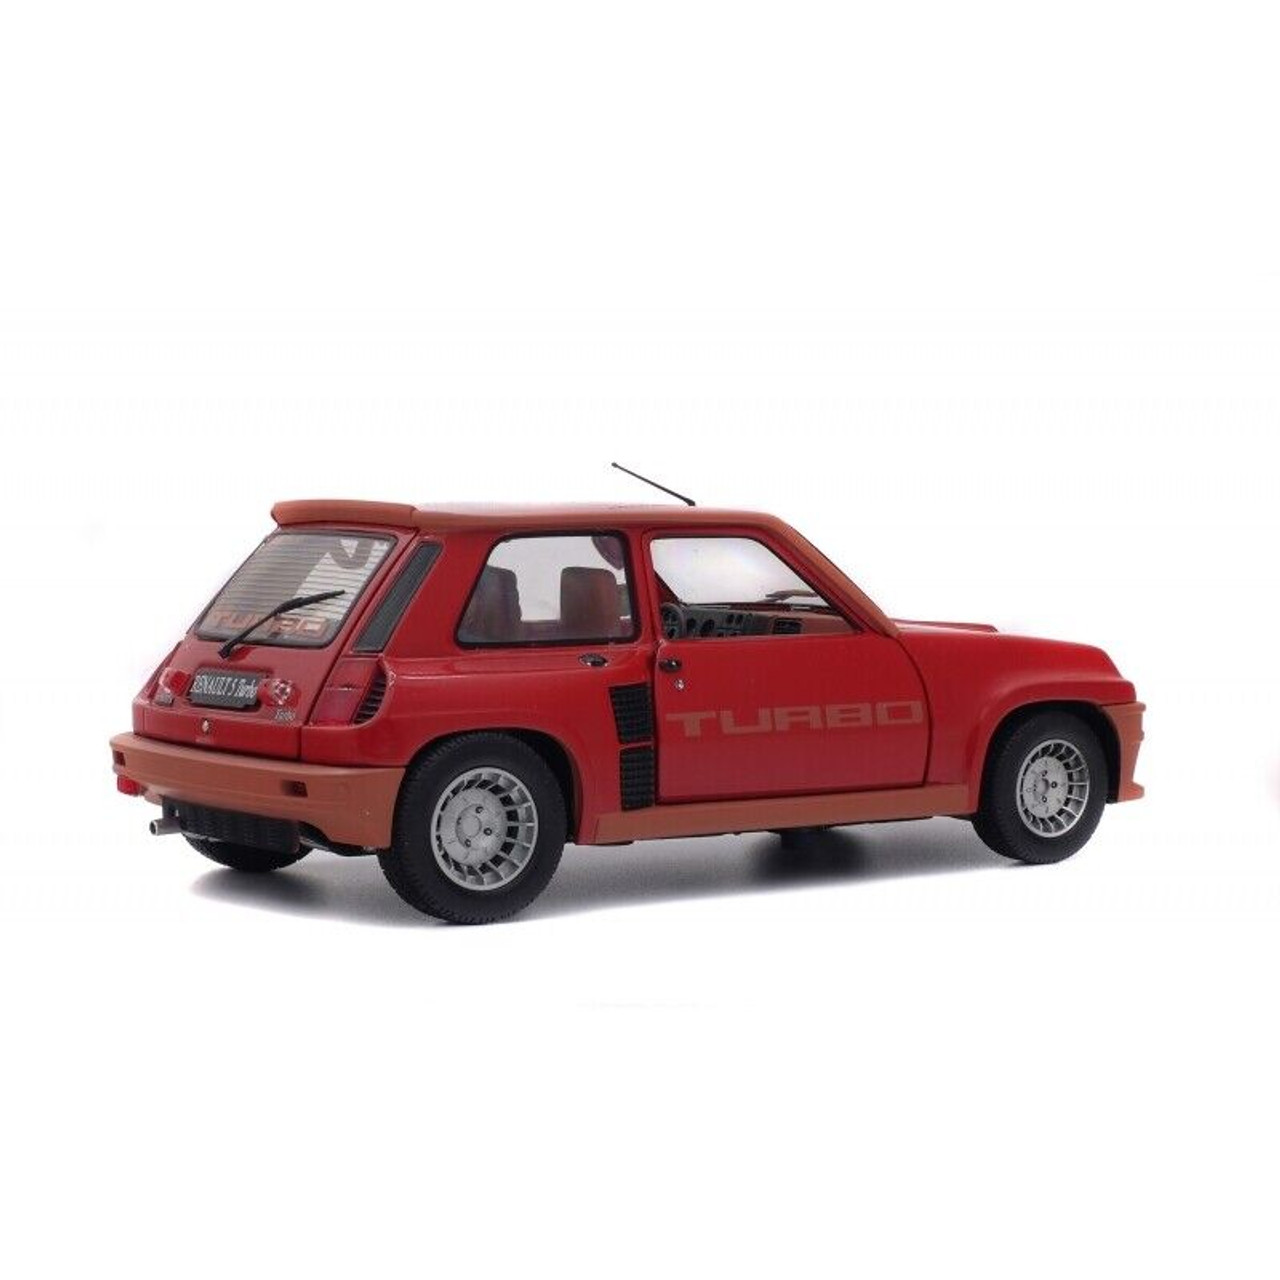 1/18 Solido 1981 Renault 5 Turbo Rouge Grenade (Red) Diecast Car Model